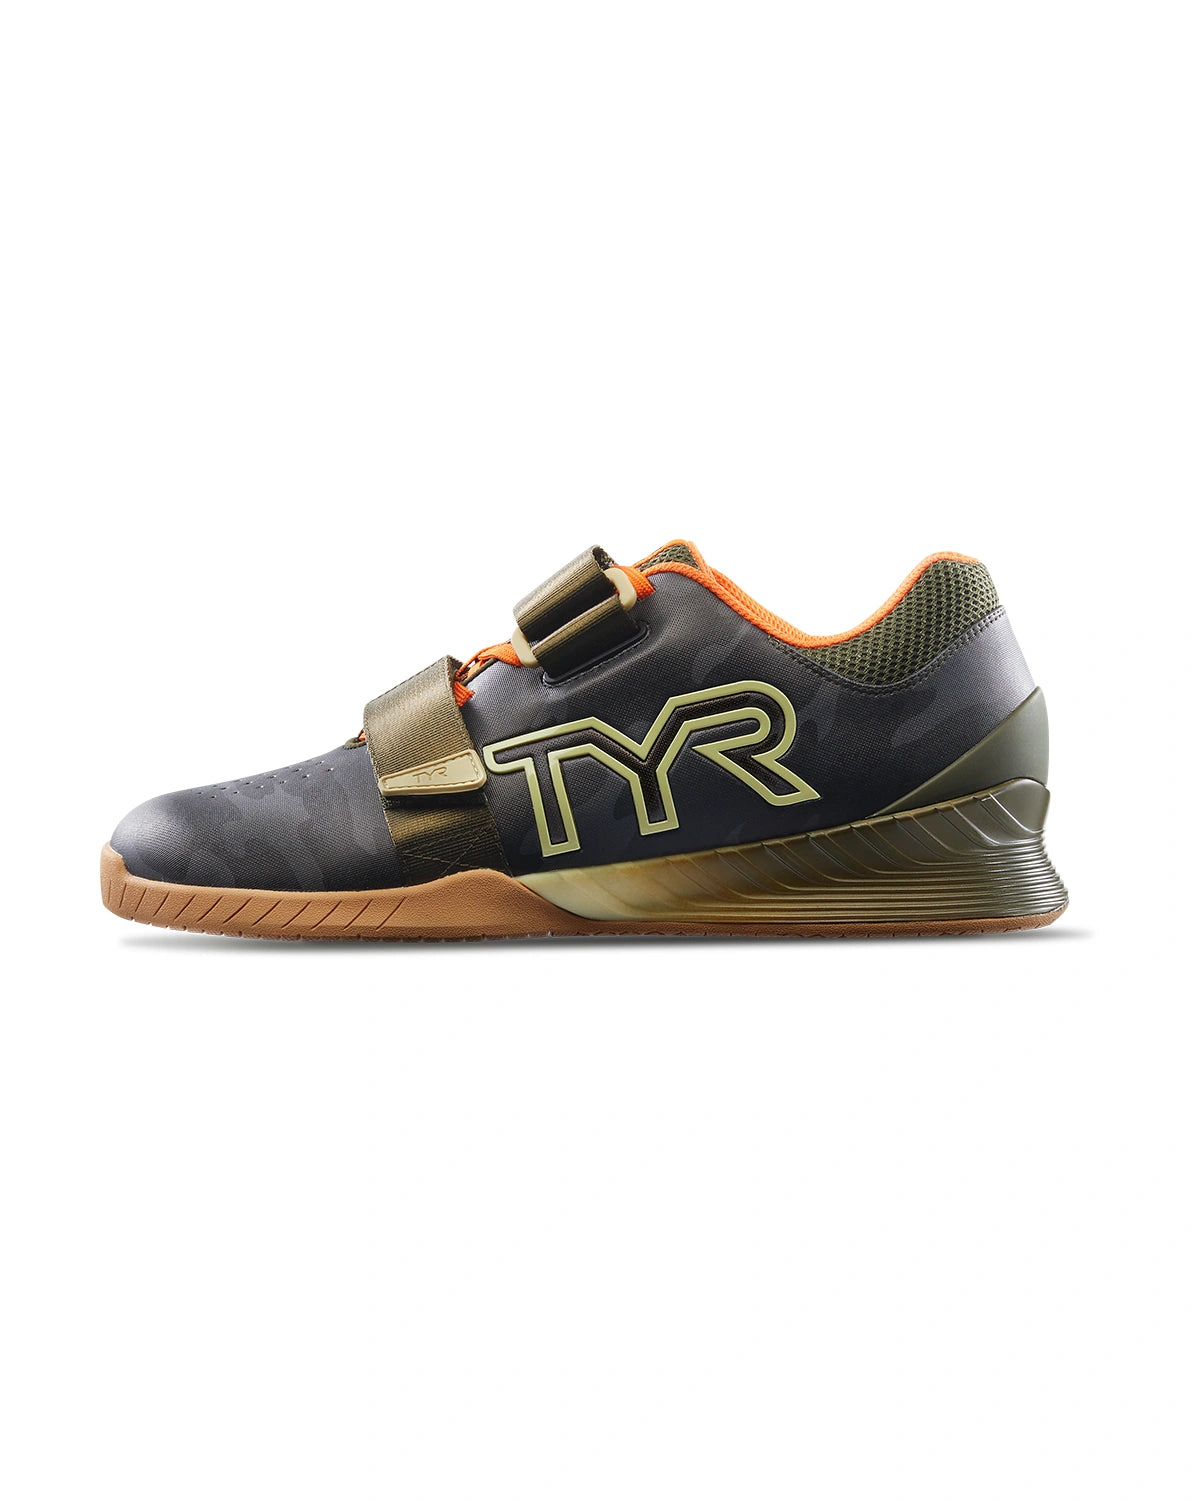 TYR L1 Lifter Weightlifting Shoe Camo / Black